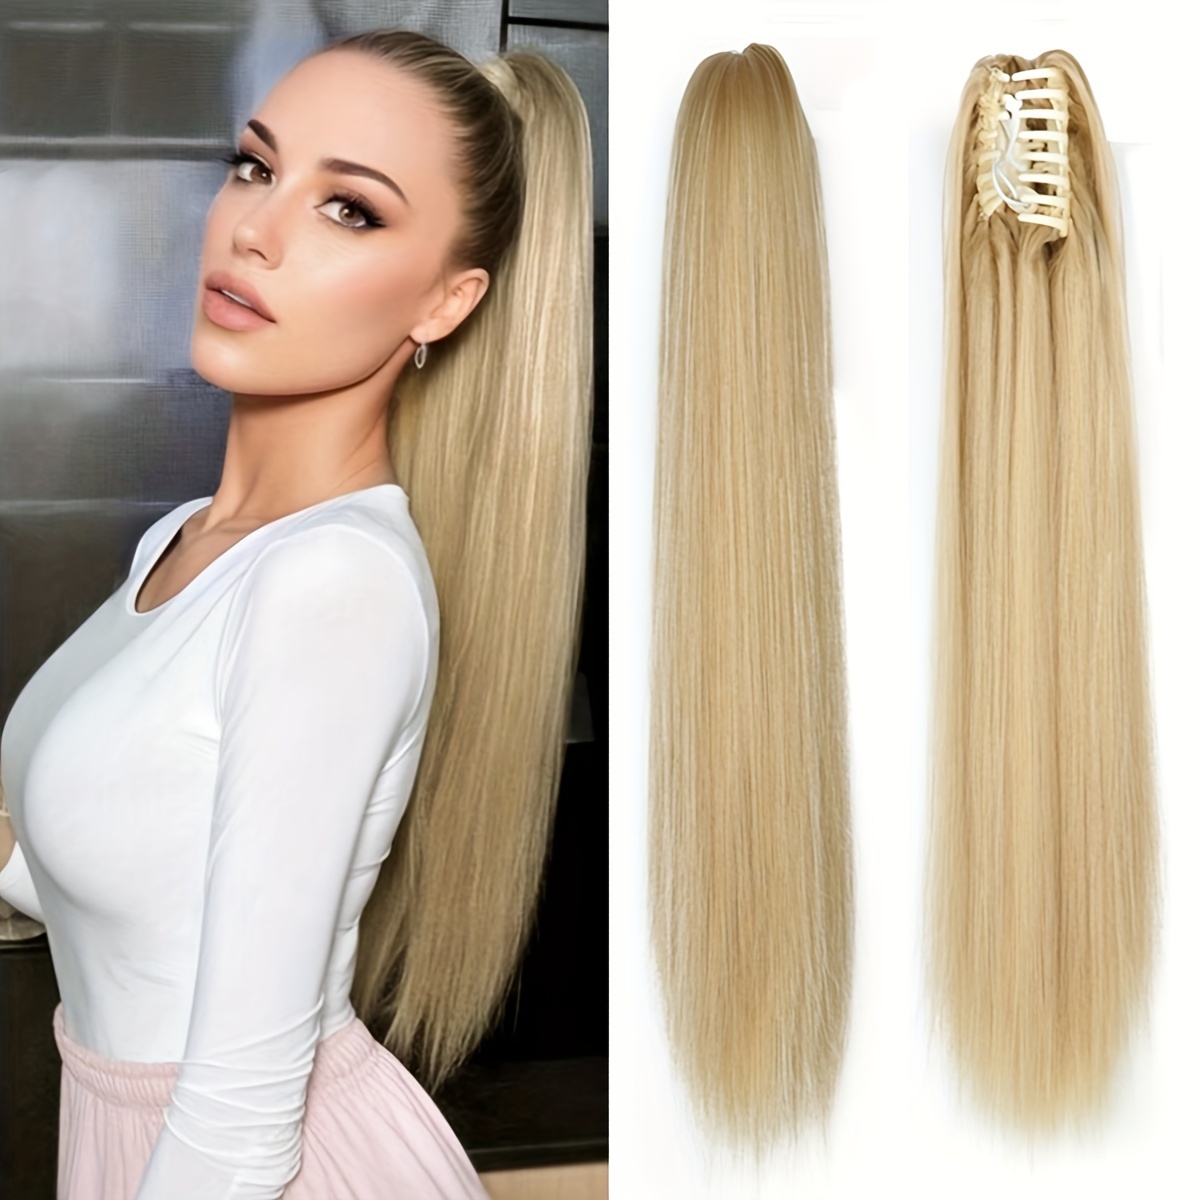 

Synthetic Long Straight Claw Clip On Ponytail Hair Extensions 24 Inch Heat Resistant Pony Tail Hair Piece Black Brown Blonde For Women Daily Party Use